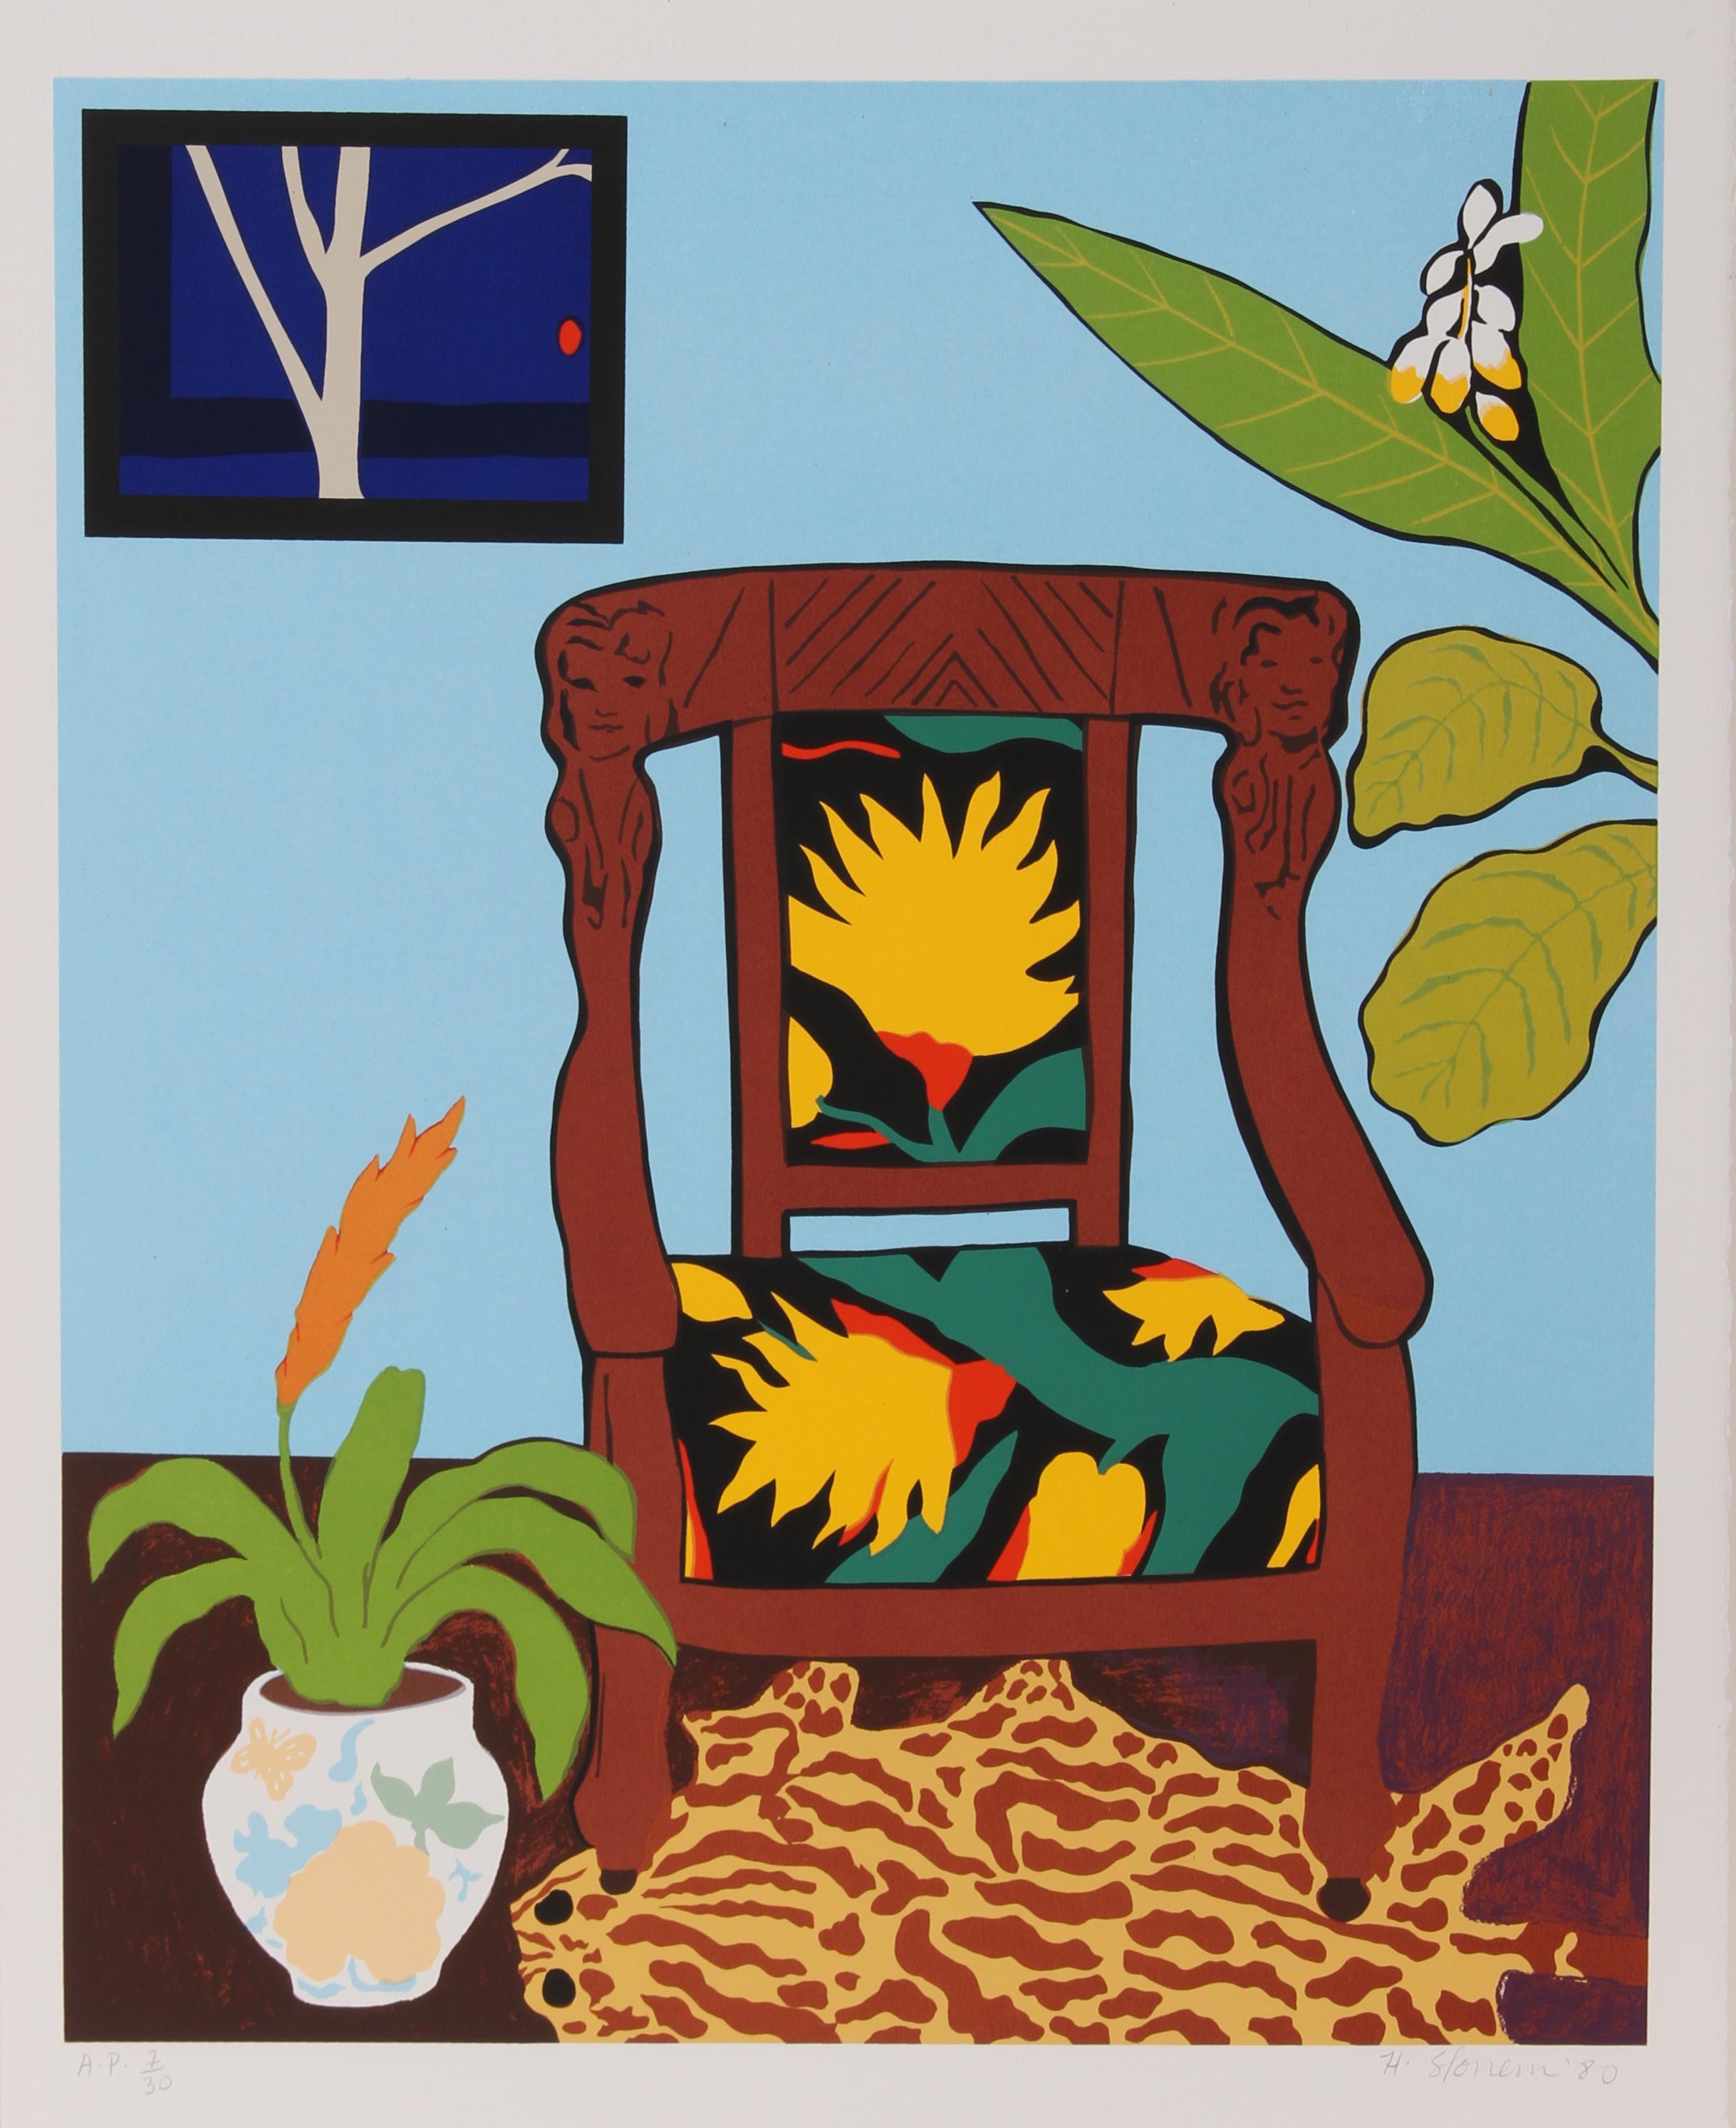 Artist:  Hunt Slonem, American (1951 - )
Title:  Shell Ginger
Year:  Circa 1980
Medium:  Serigraph, signed and numbered in pencil
Edition:  175, AP 30
Image Size:  25 x 20 inches
Size:  30 in. x 22 in. (76.2 cm x 55.88 cm)